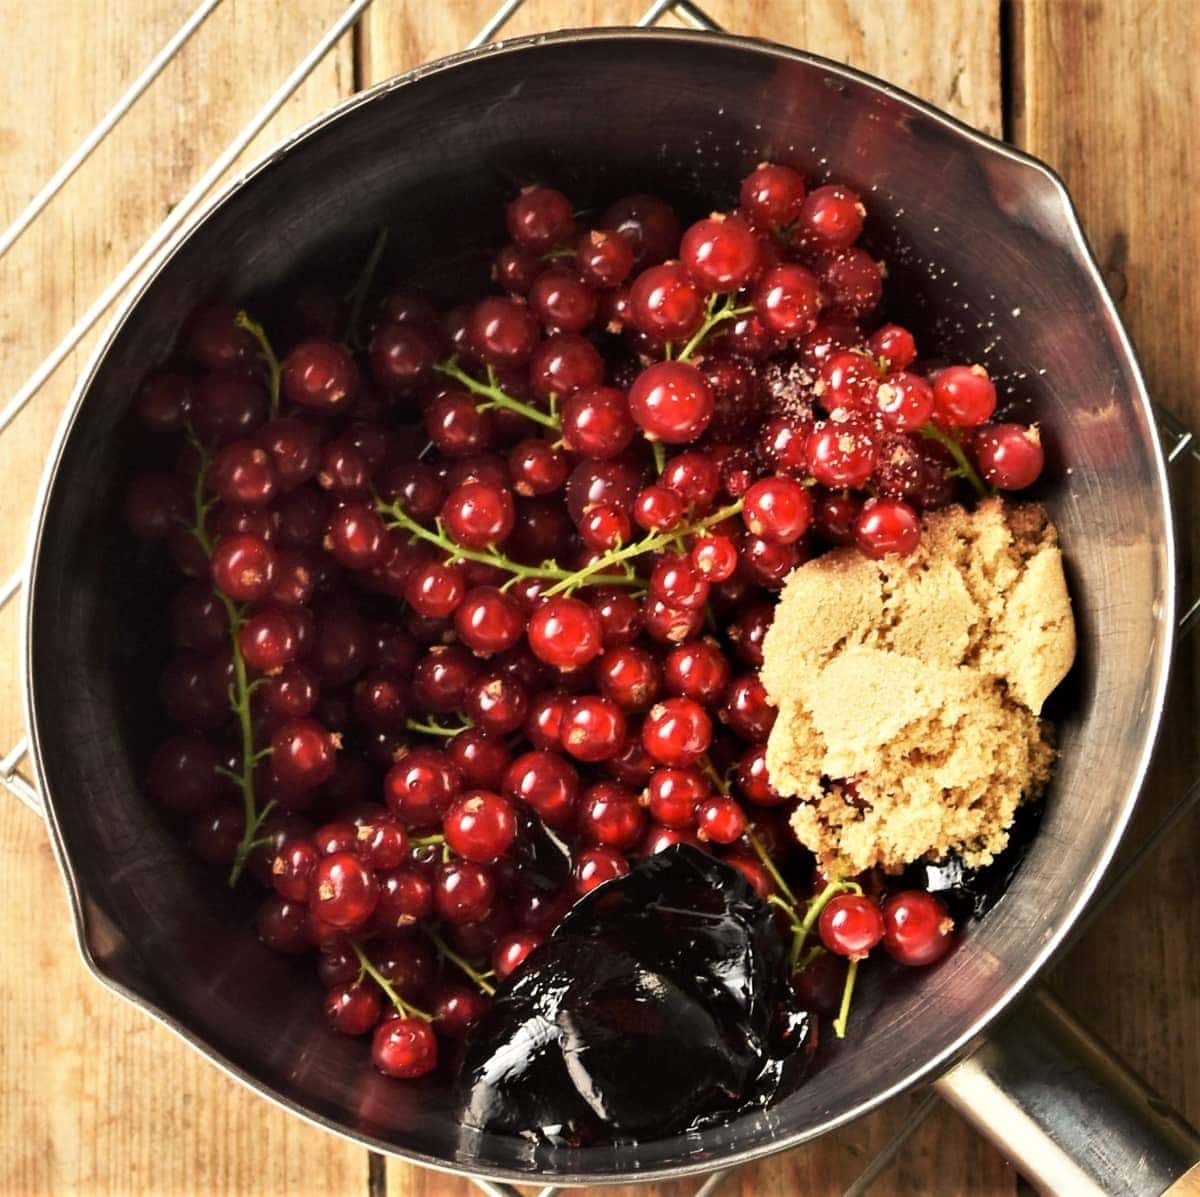 Redcurrants with stems, brown sugar and jelly in saucepan.